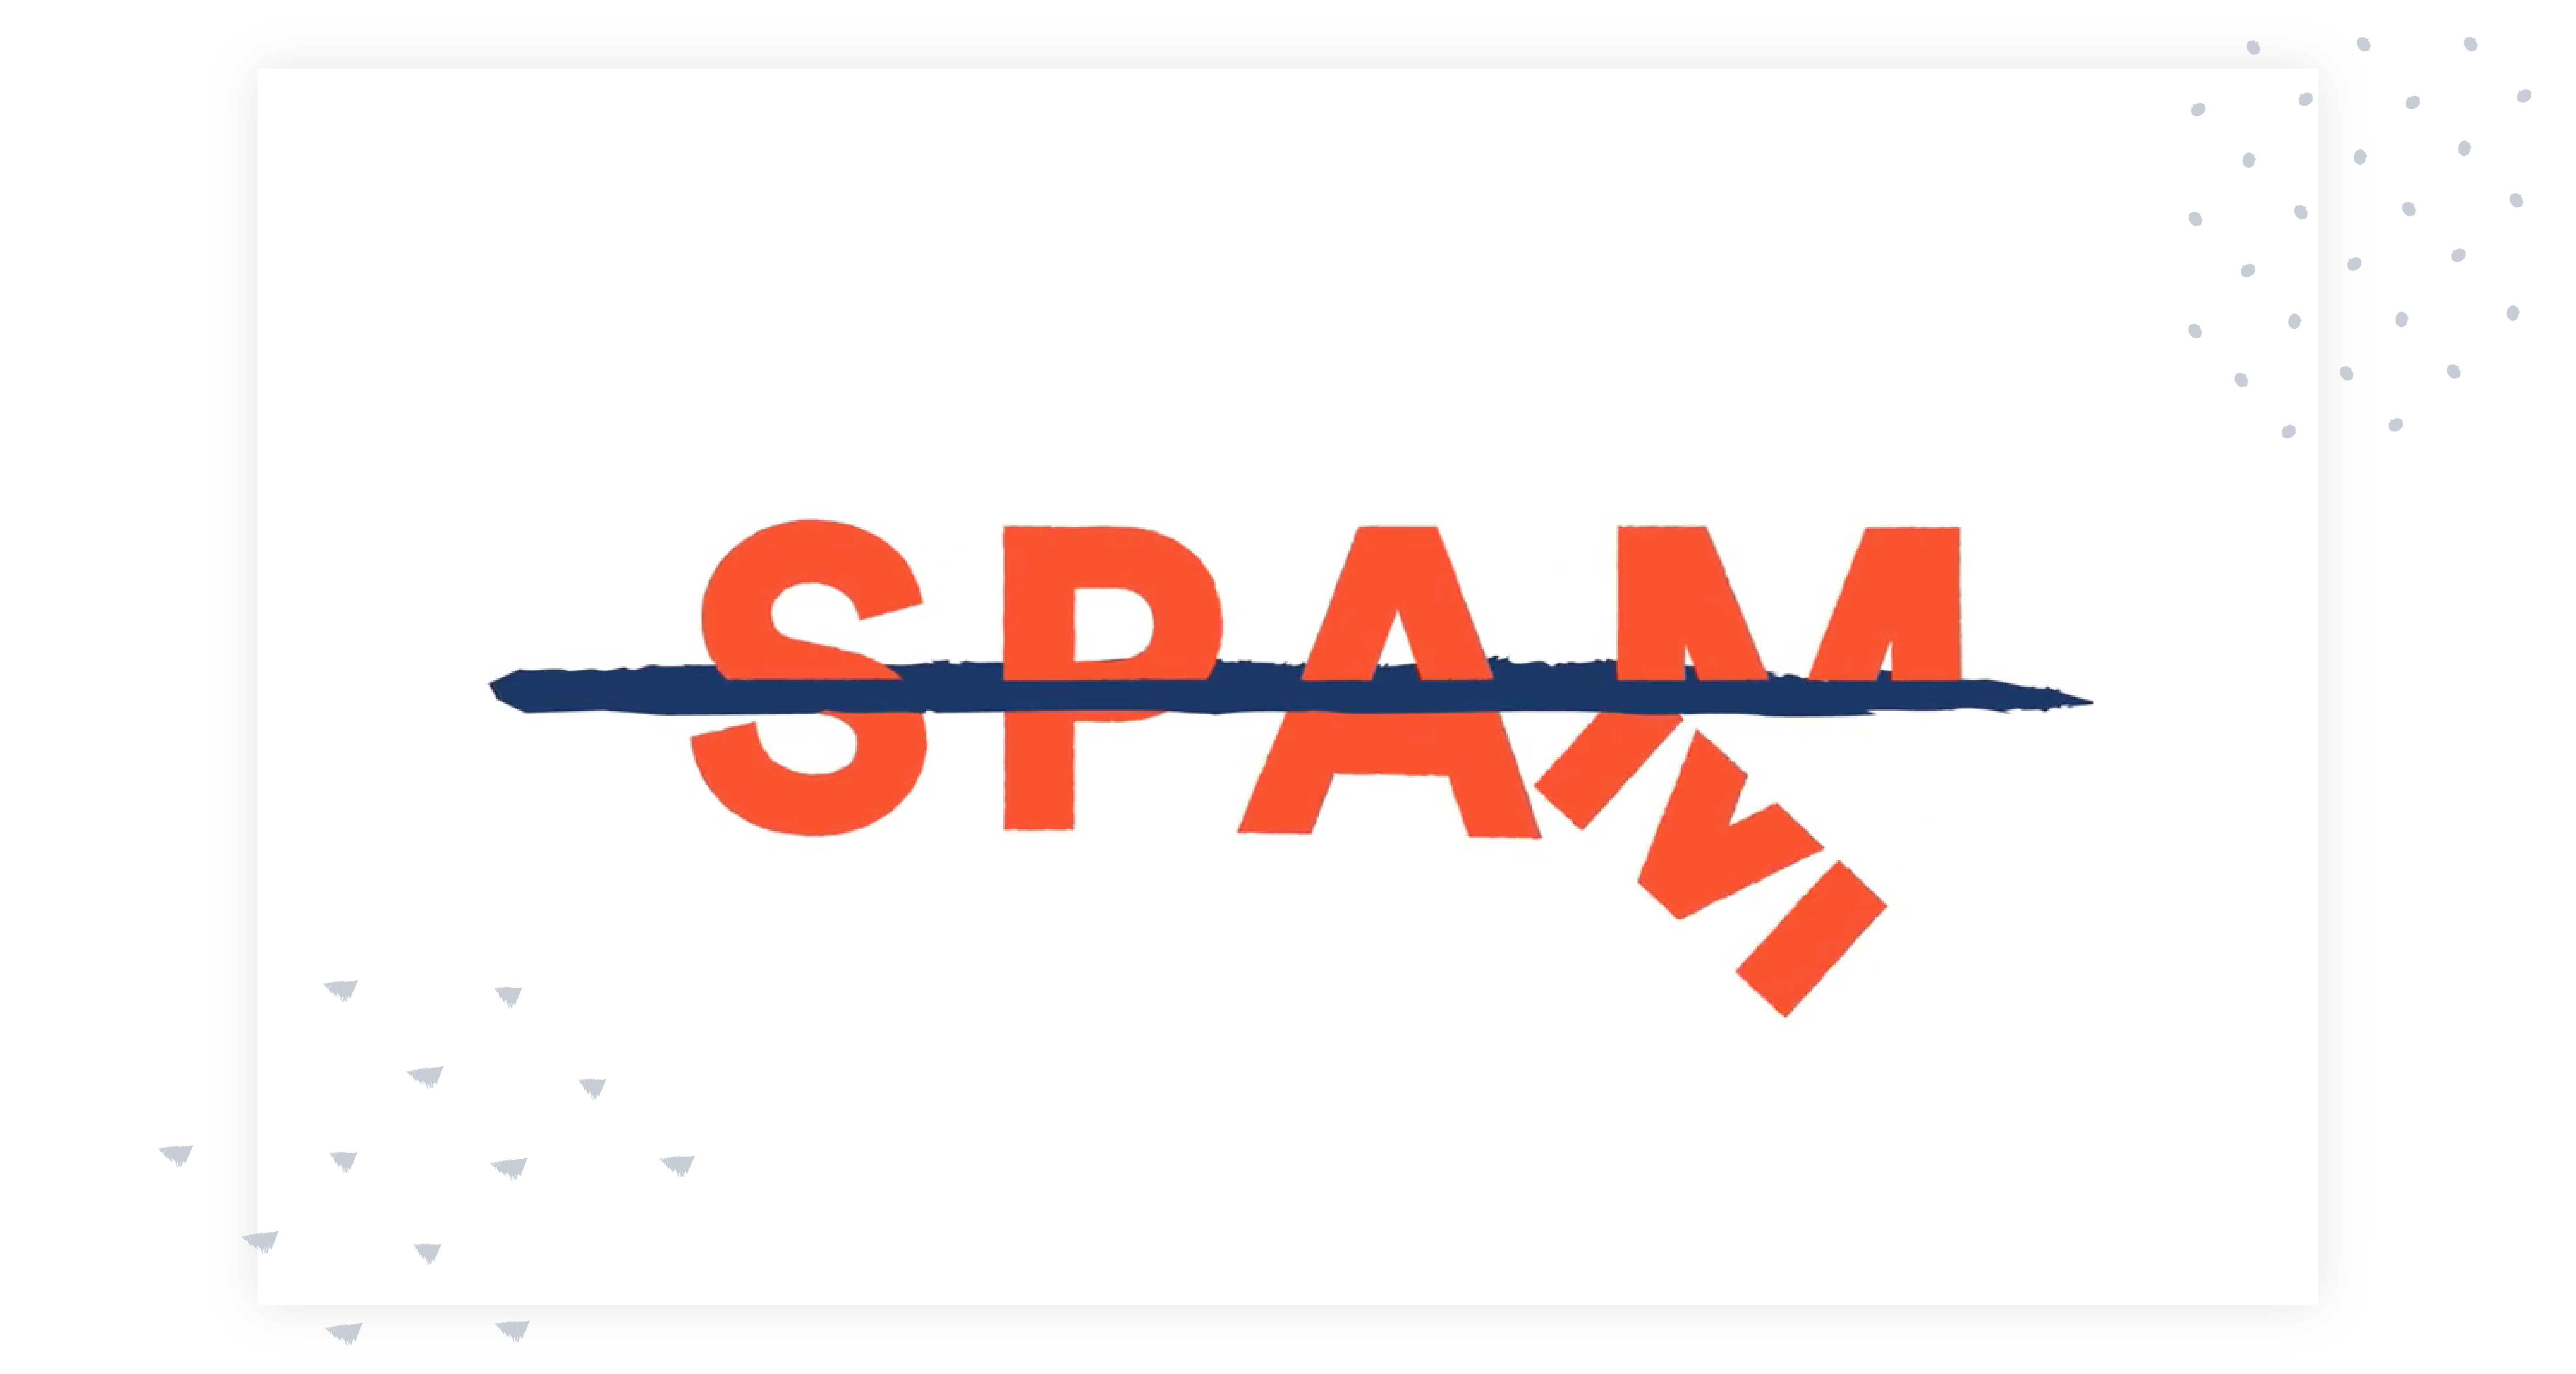 the word spam being cut in half